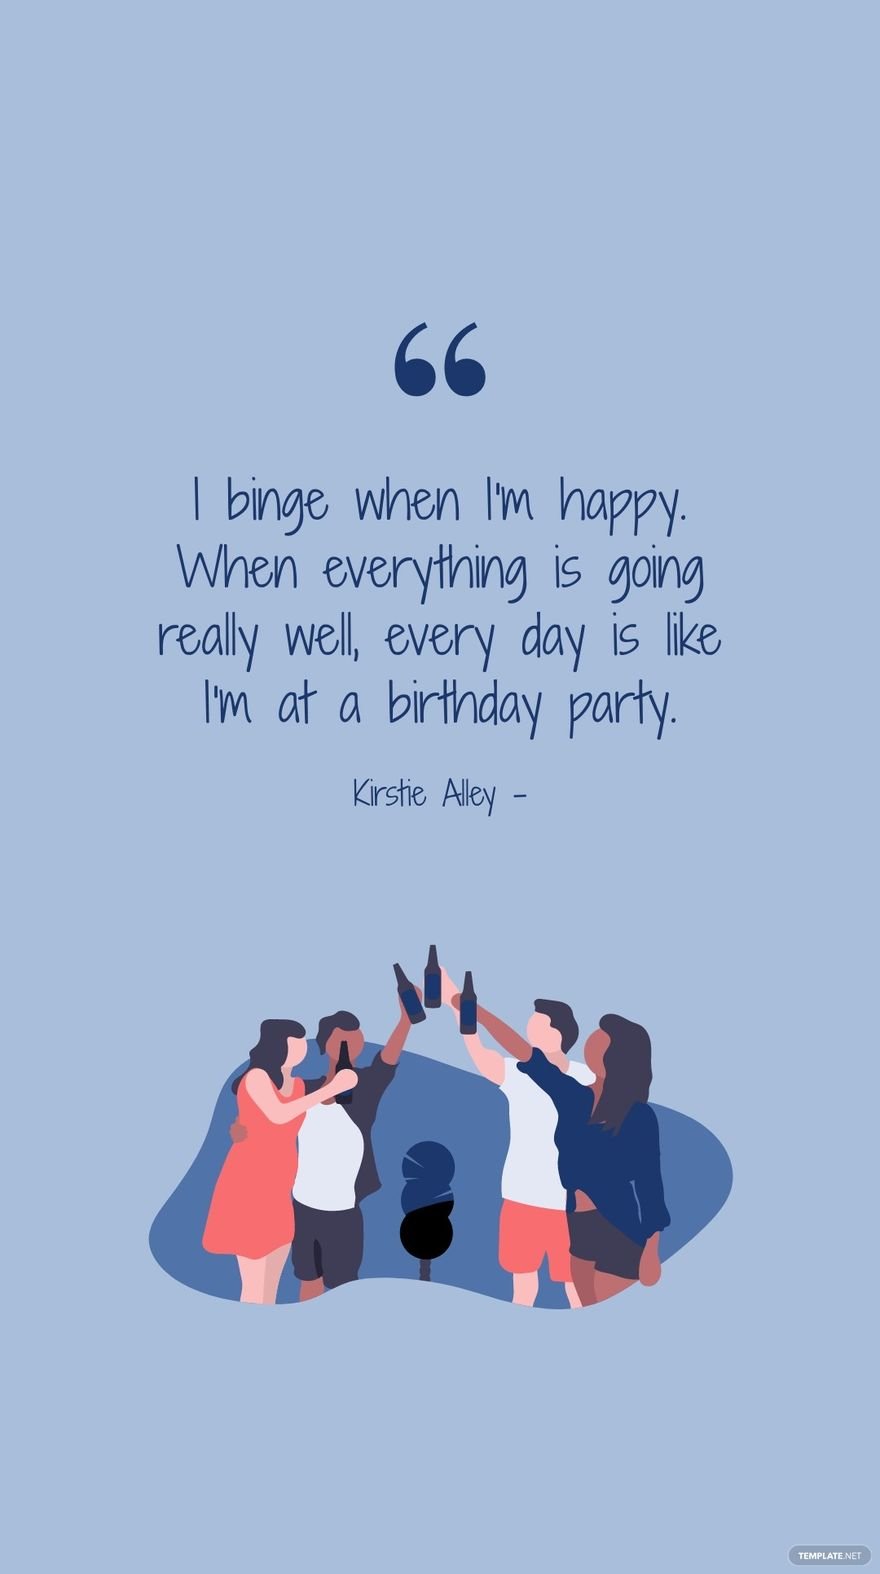 Kirstie Alley - I binge when I'm happy. When everything is going really well, every day is like I'm at a birthday party. in JPG